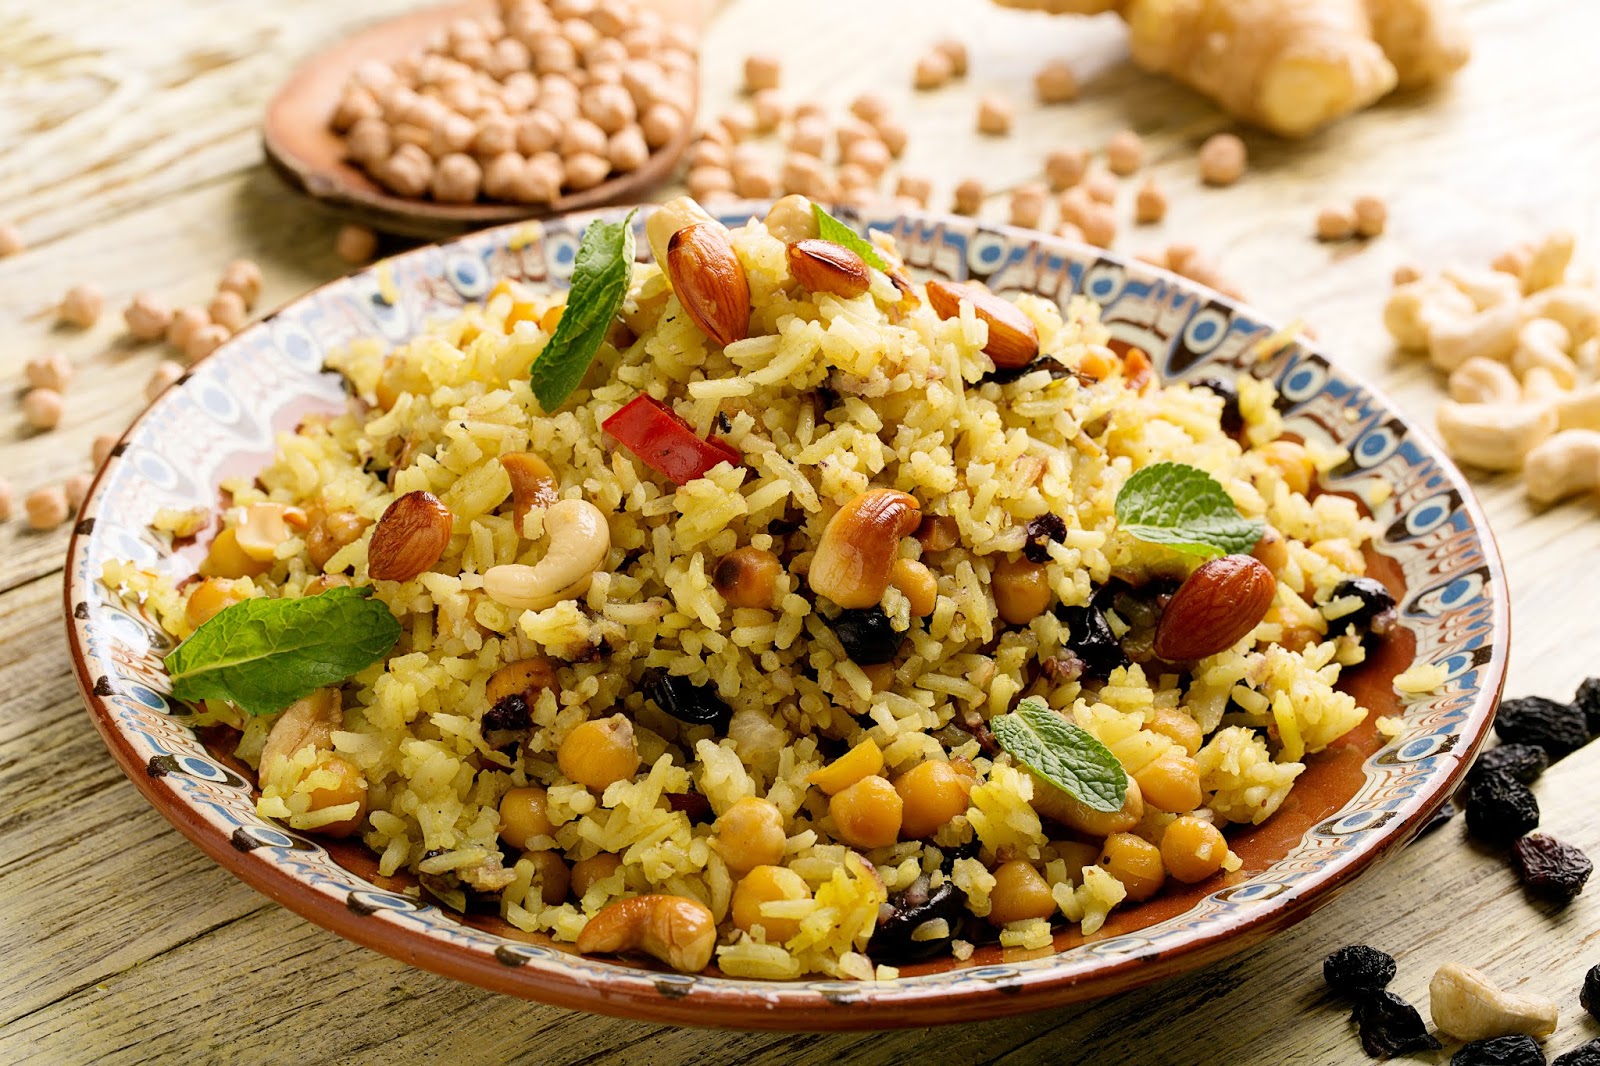 middle-eastern-inspired-pilaf-with-chickpeas-utterly-scrummy-food-for